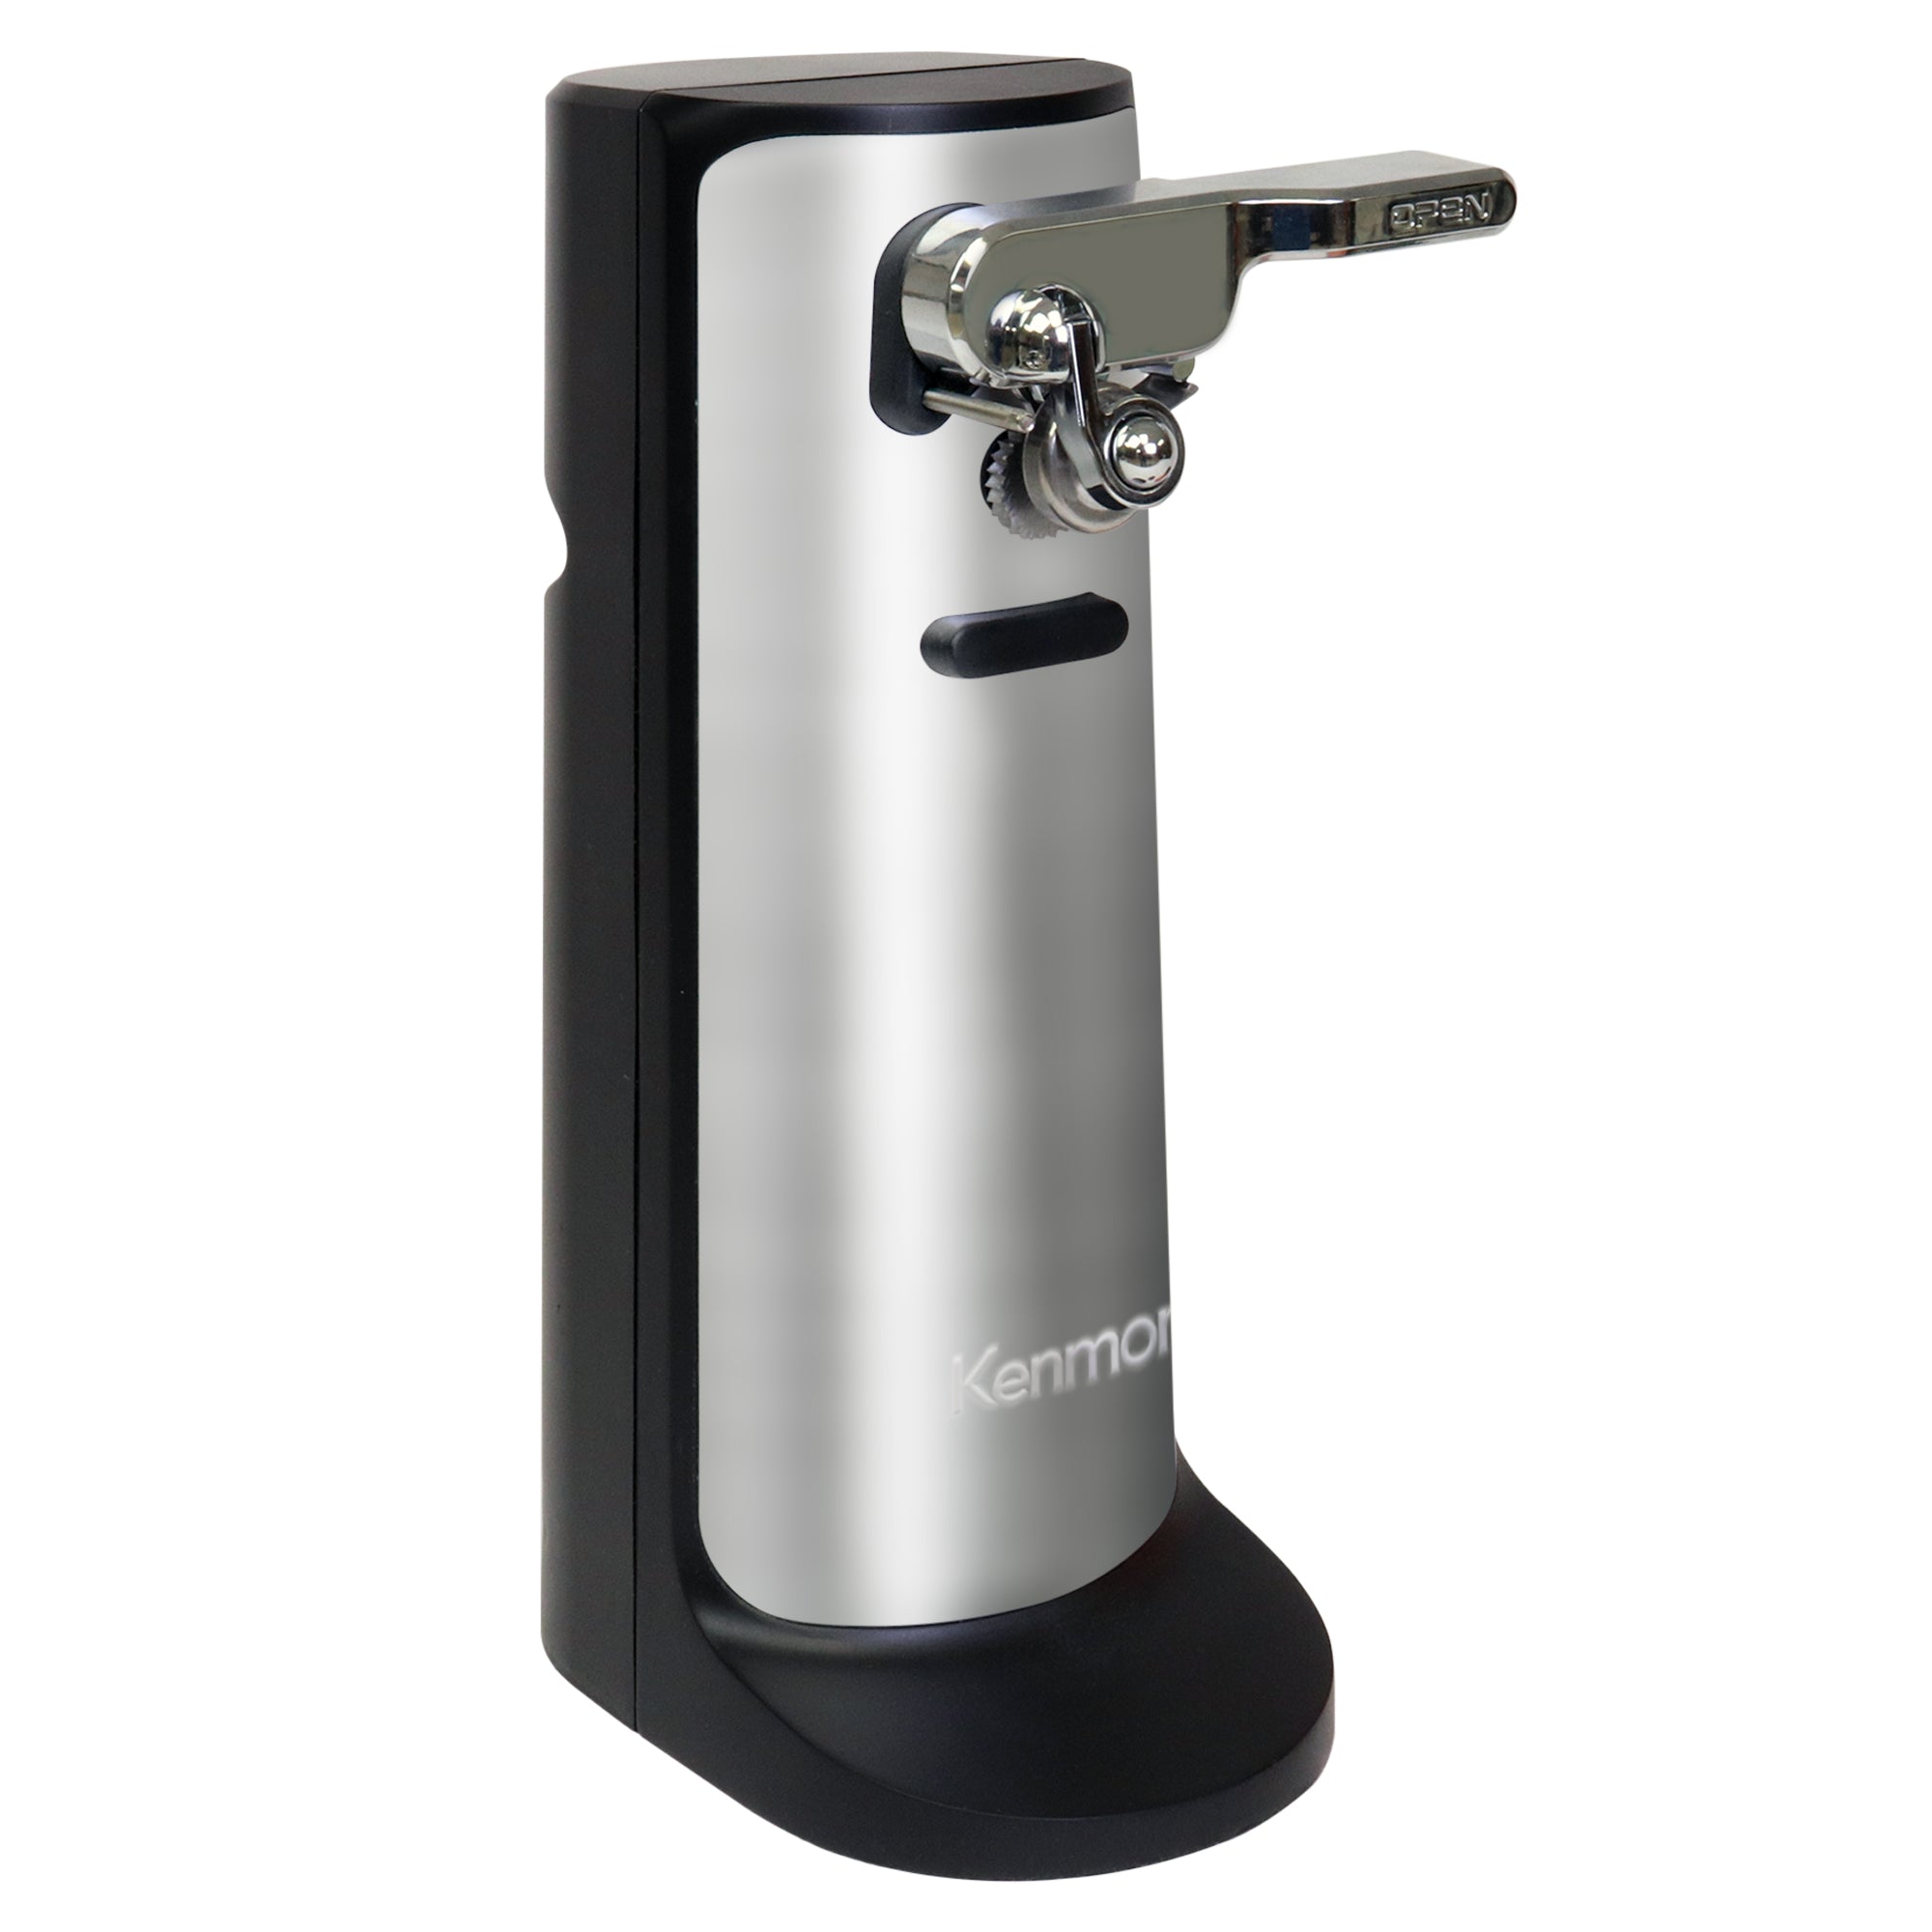 Kenmore 3-in-1 automatic can opener with knife sharpener and bottle opener on a white background